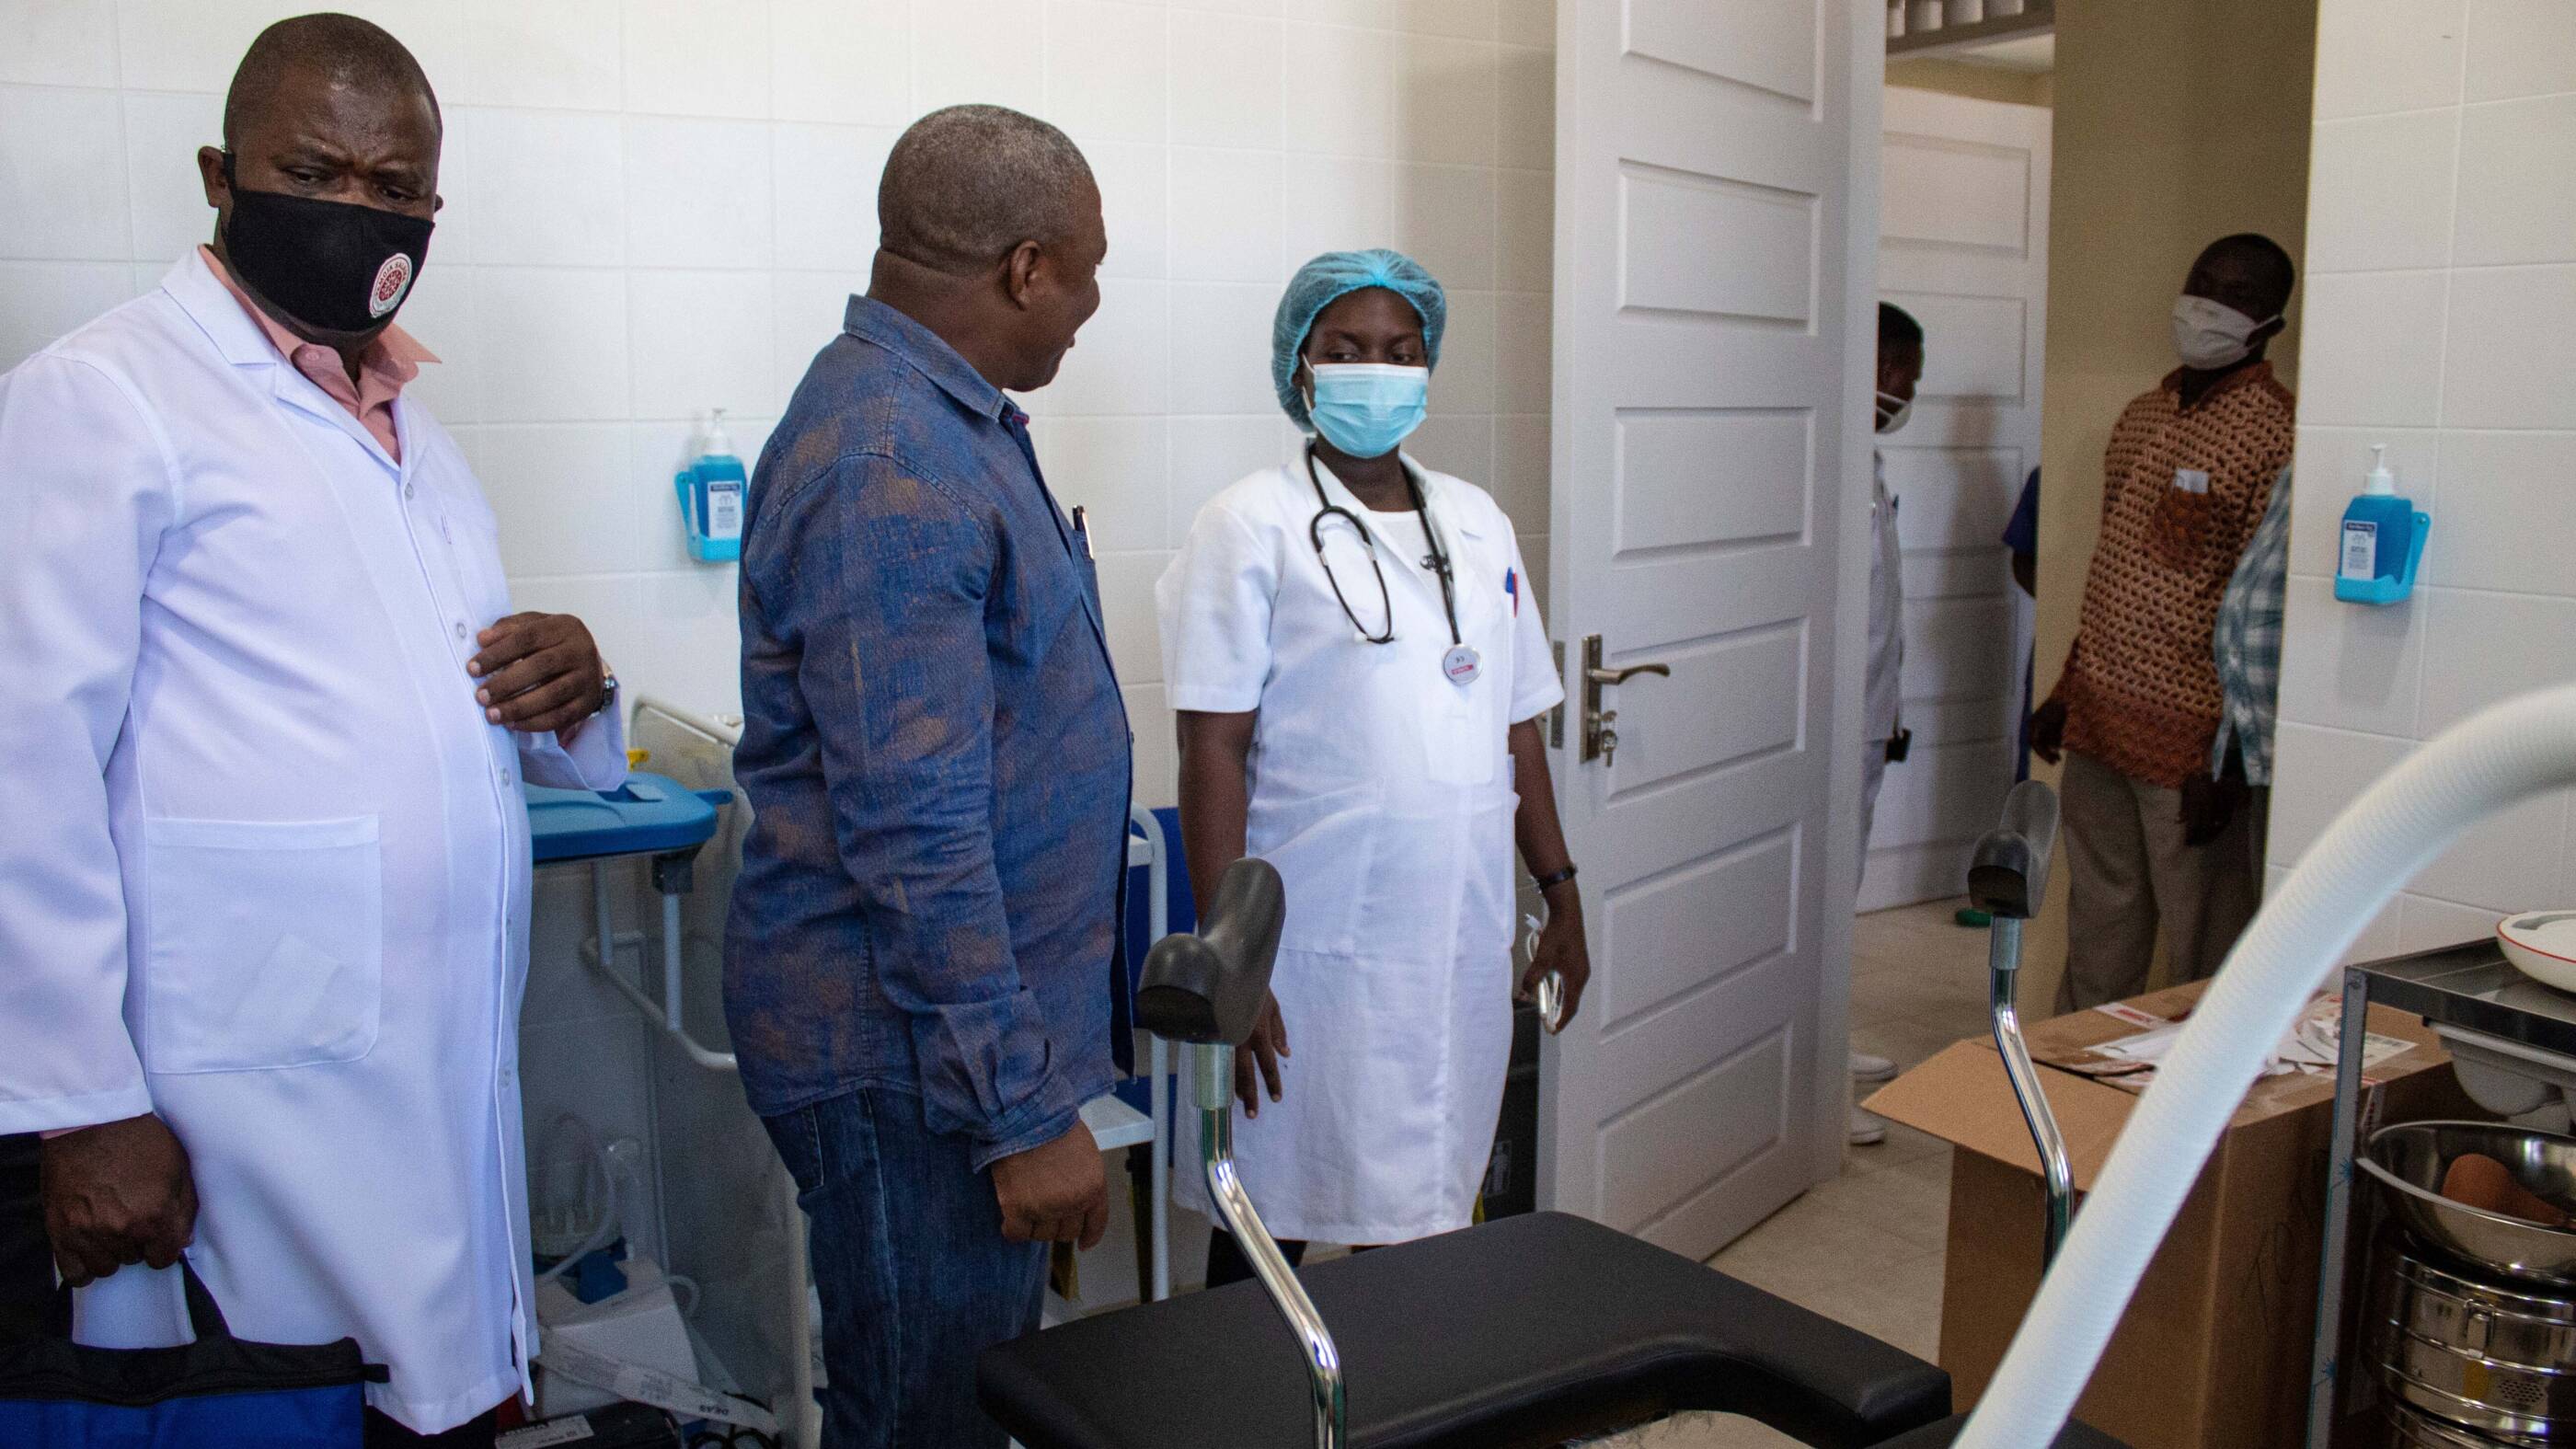 Image Governor inside the rehabilitated Maganja Health Center.